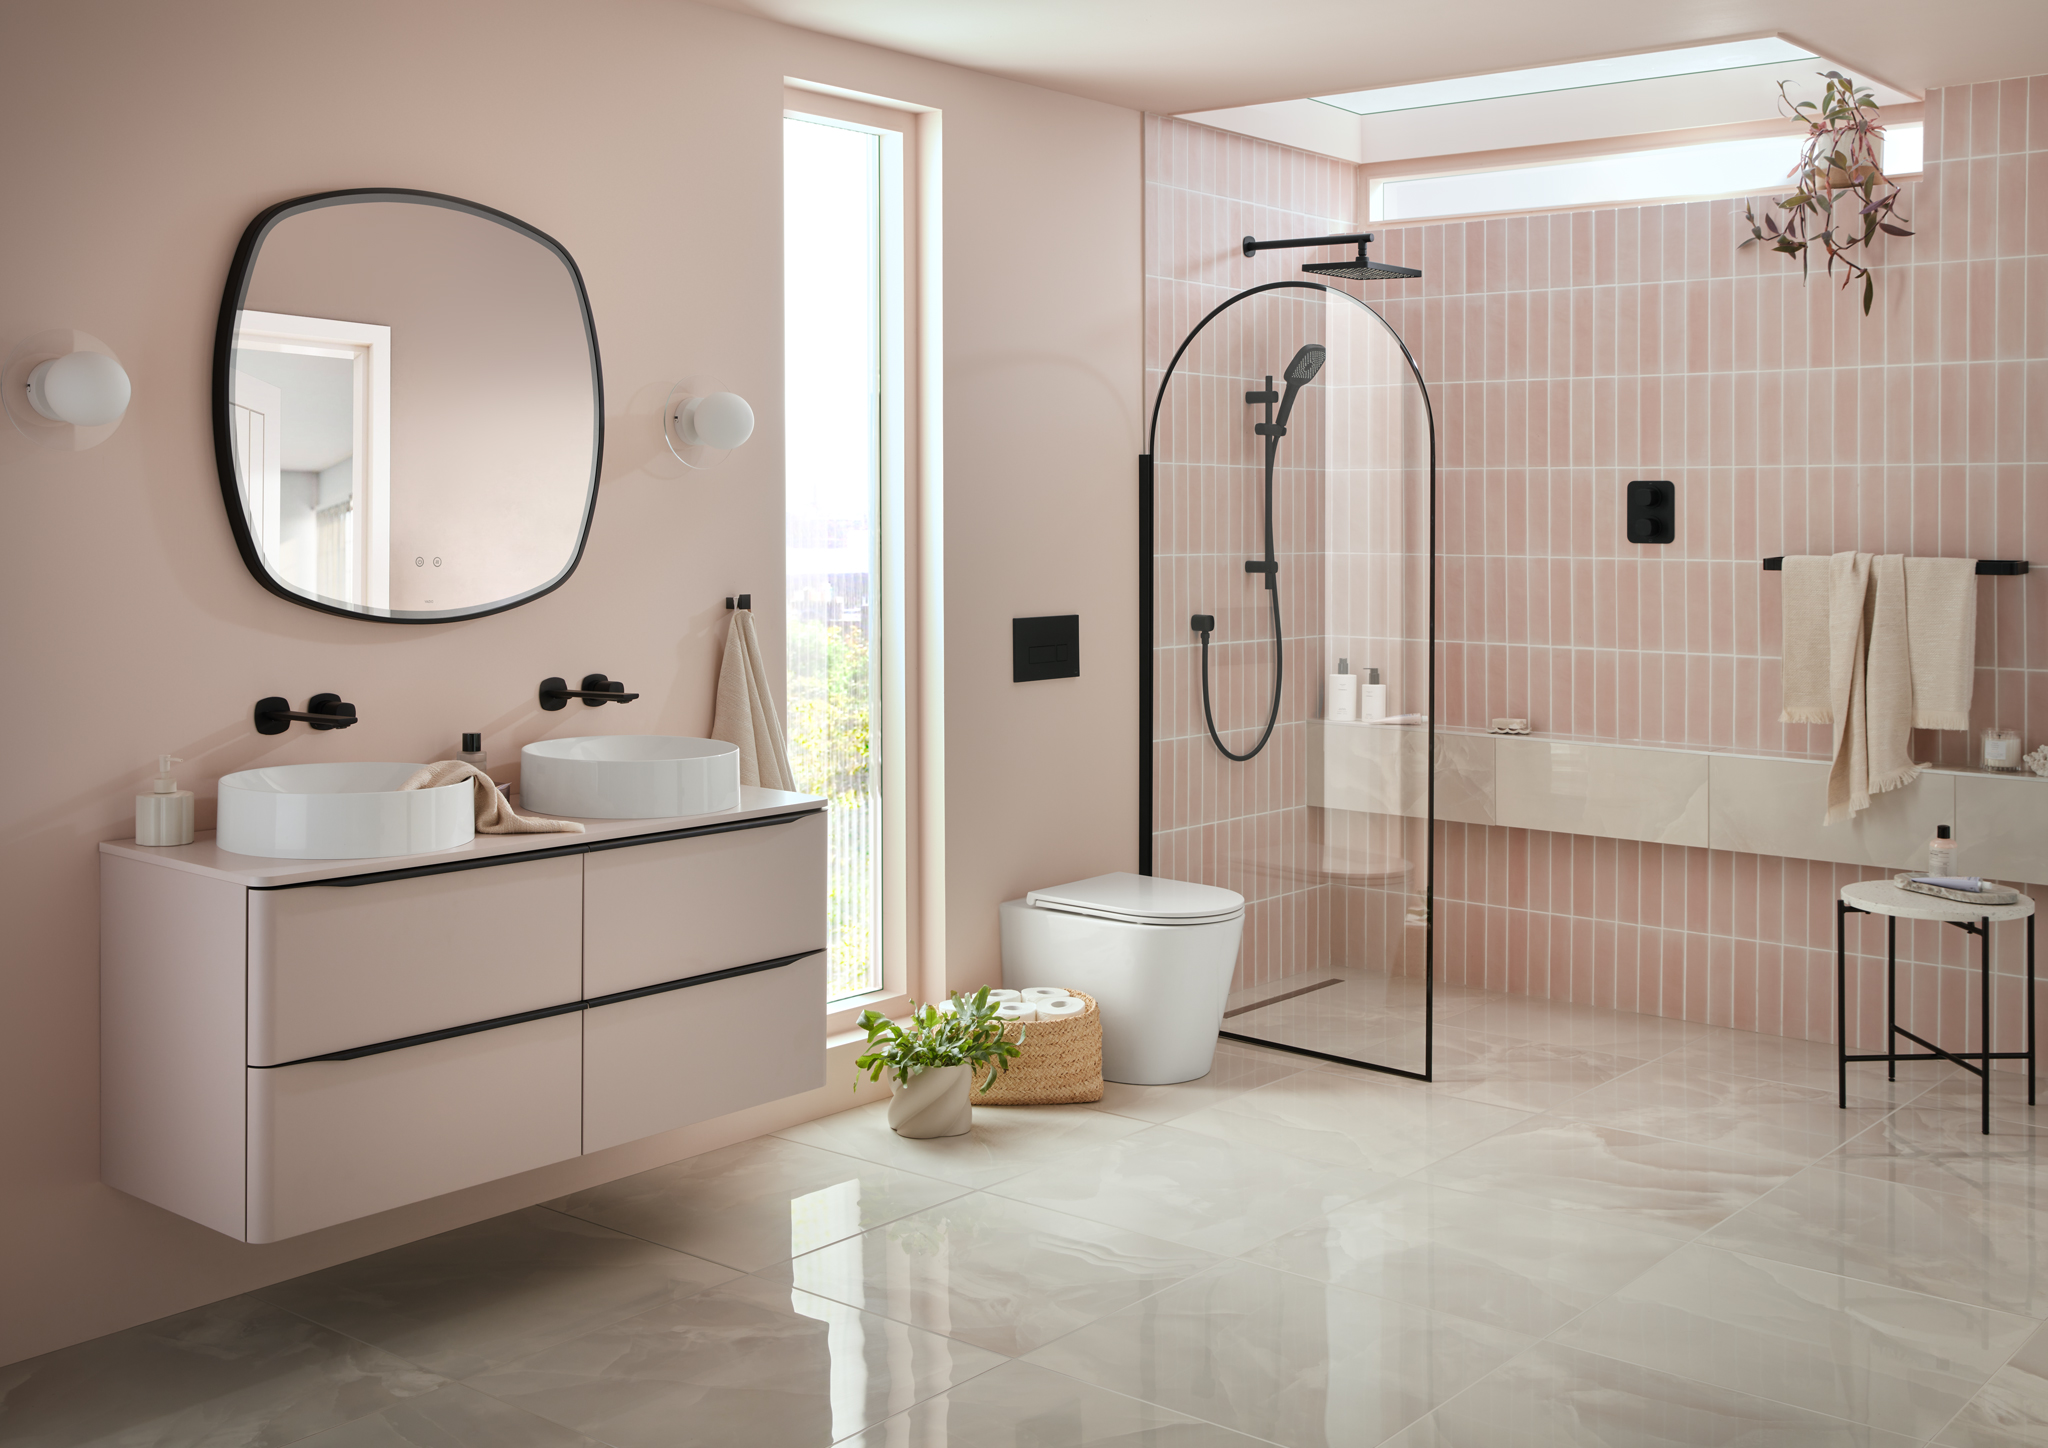 Are Pink Bathrooms Coming Back? A Guide to Using Pink in the Modern Home